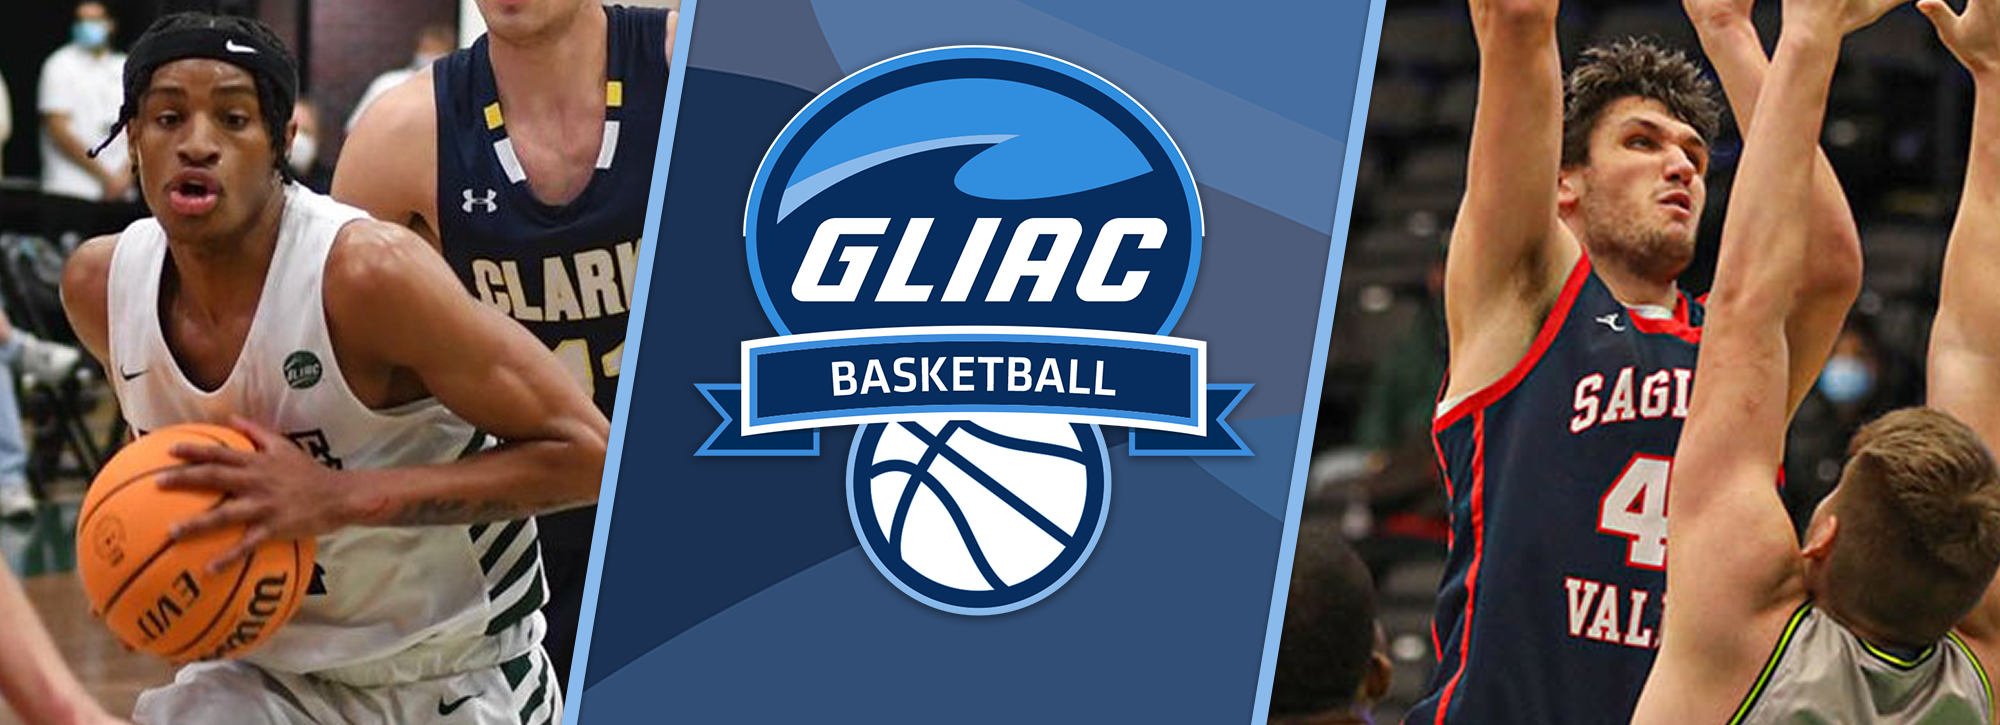 Parkside's Croft and SVSU's Witz named GLIAC Men's Basketball Players of the Week